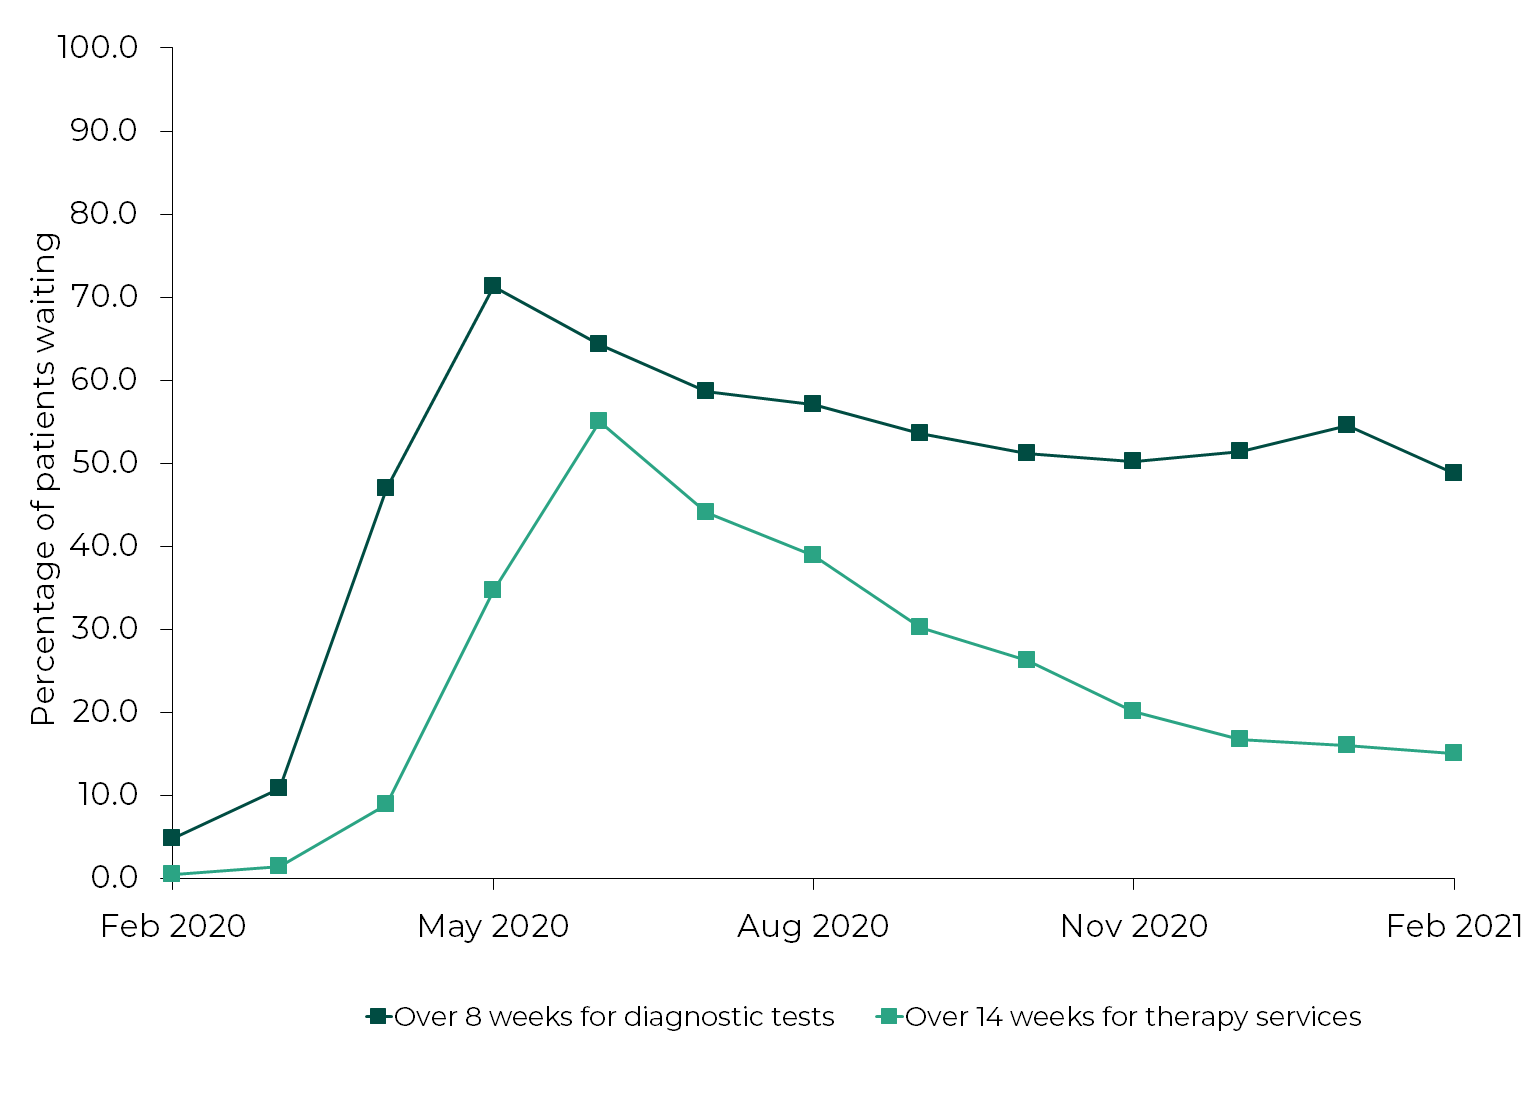 In February 2020 4.8% of patients were waiting over 8 weeks for diagnostic tests, this peaked at 71.3% in May 2020 and stood at 48.7% in February 2021. In February 2020 0.5% of patients were waiting over 14 weeks for therapy services, this peaked at 55.0% in June 2020 and stood at 15.0% in February 2021.